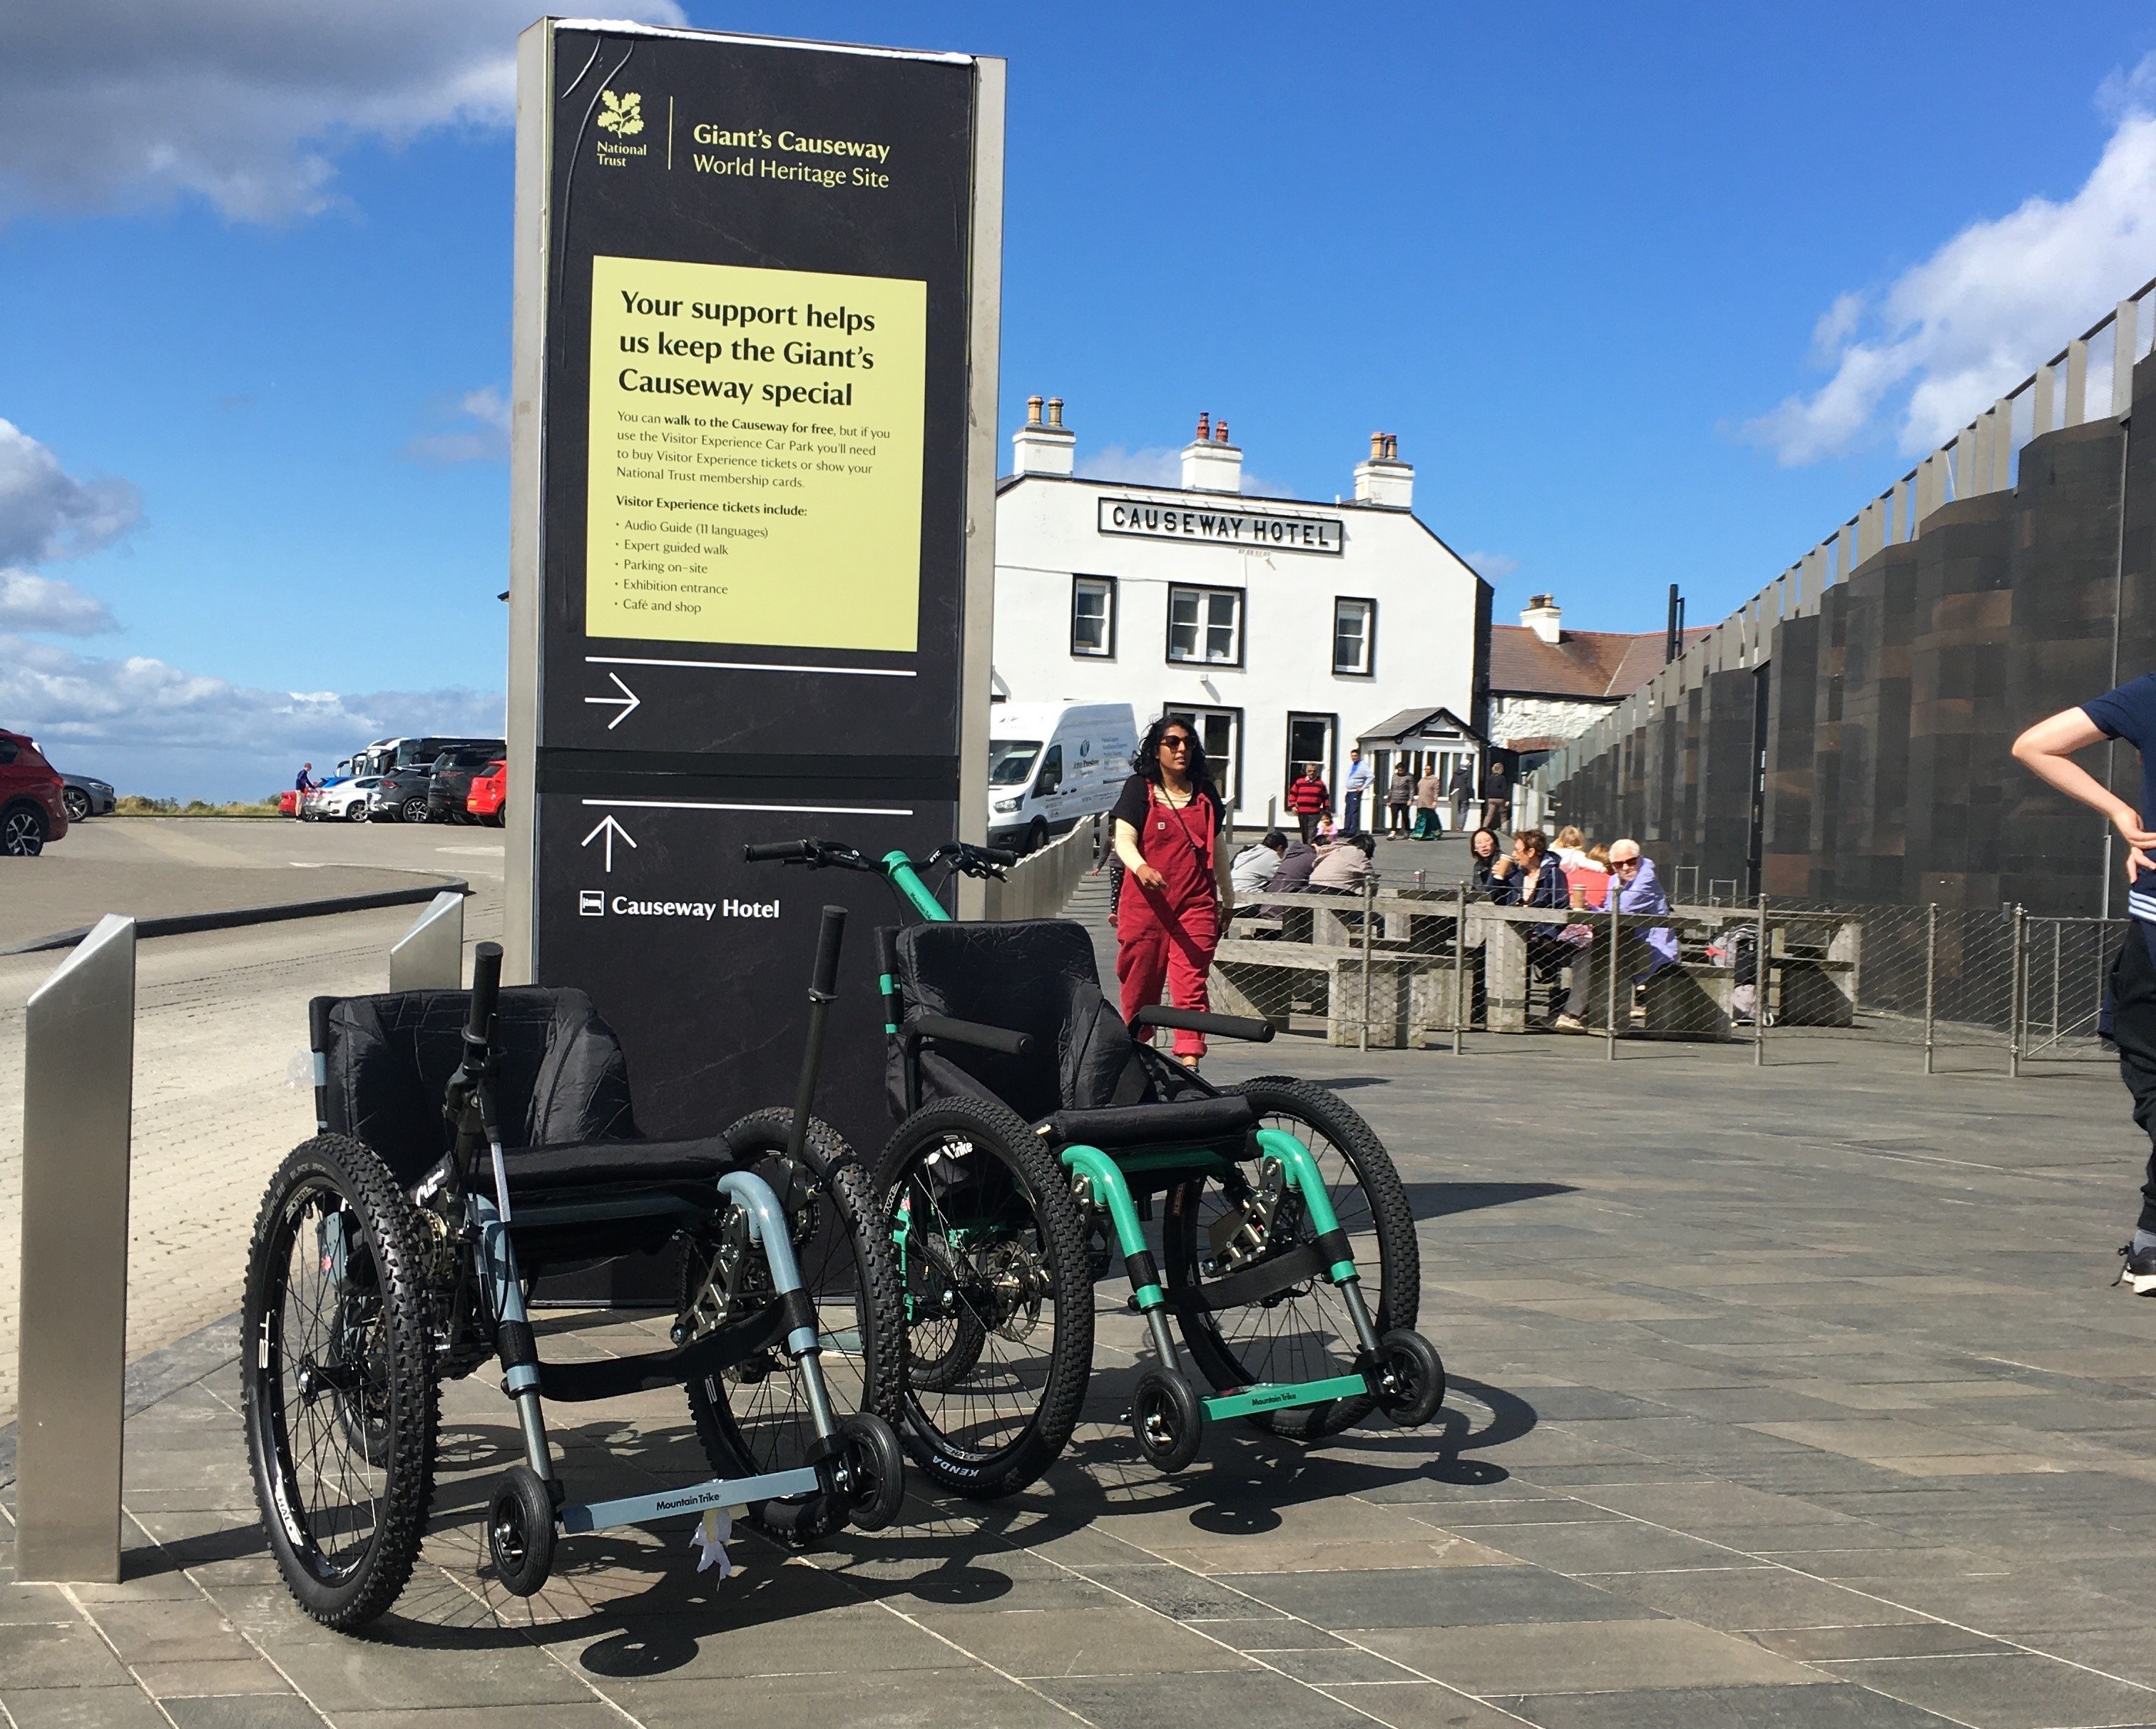 All terrain wheelchairs supporting access for all at Giant's Causeway National Trust in Northern Ireland